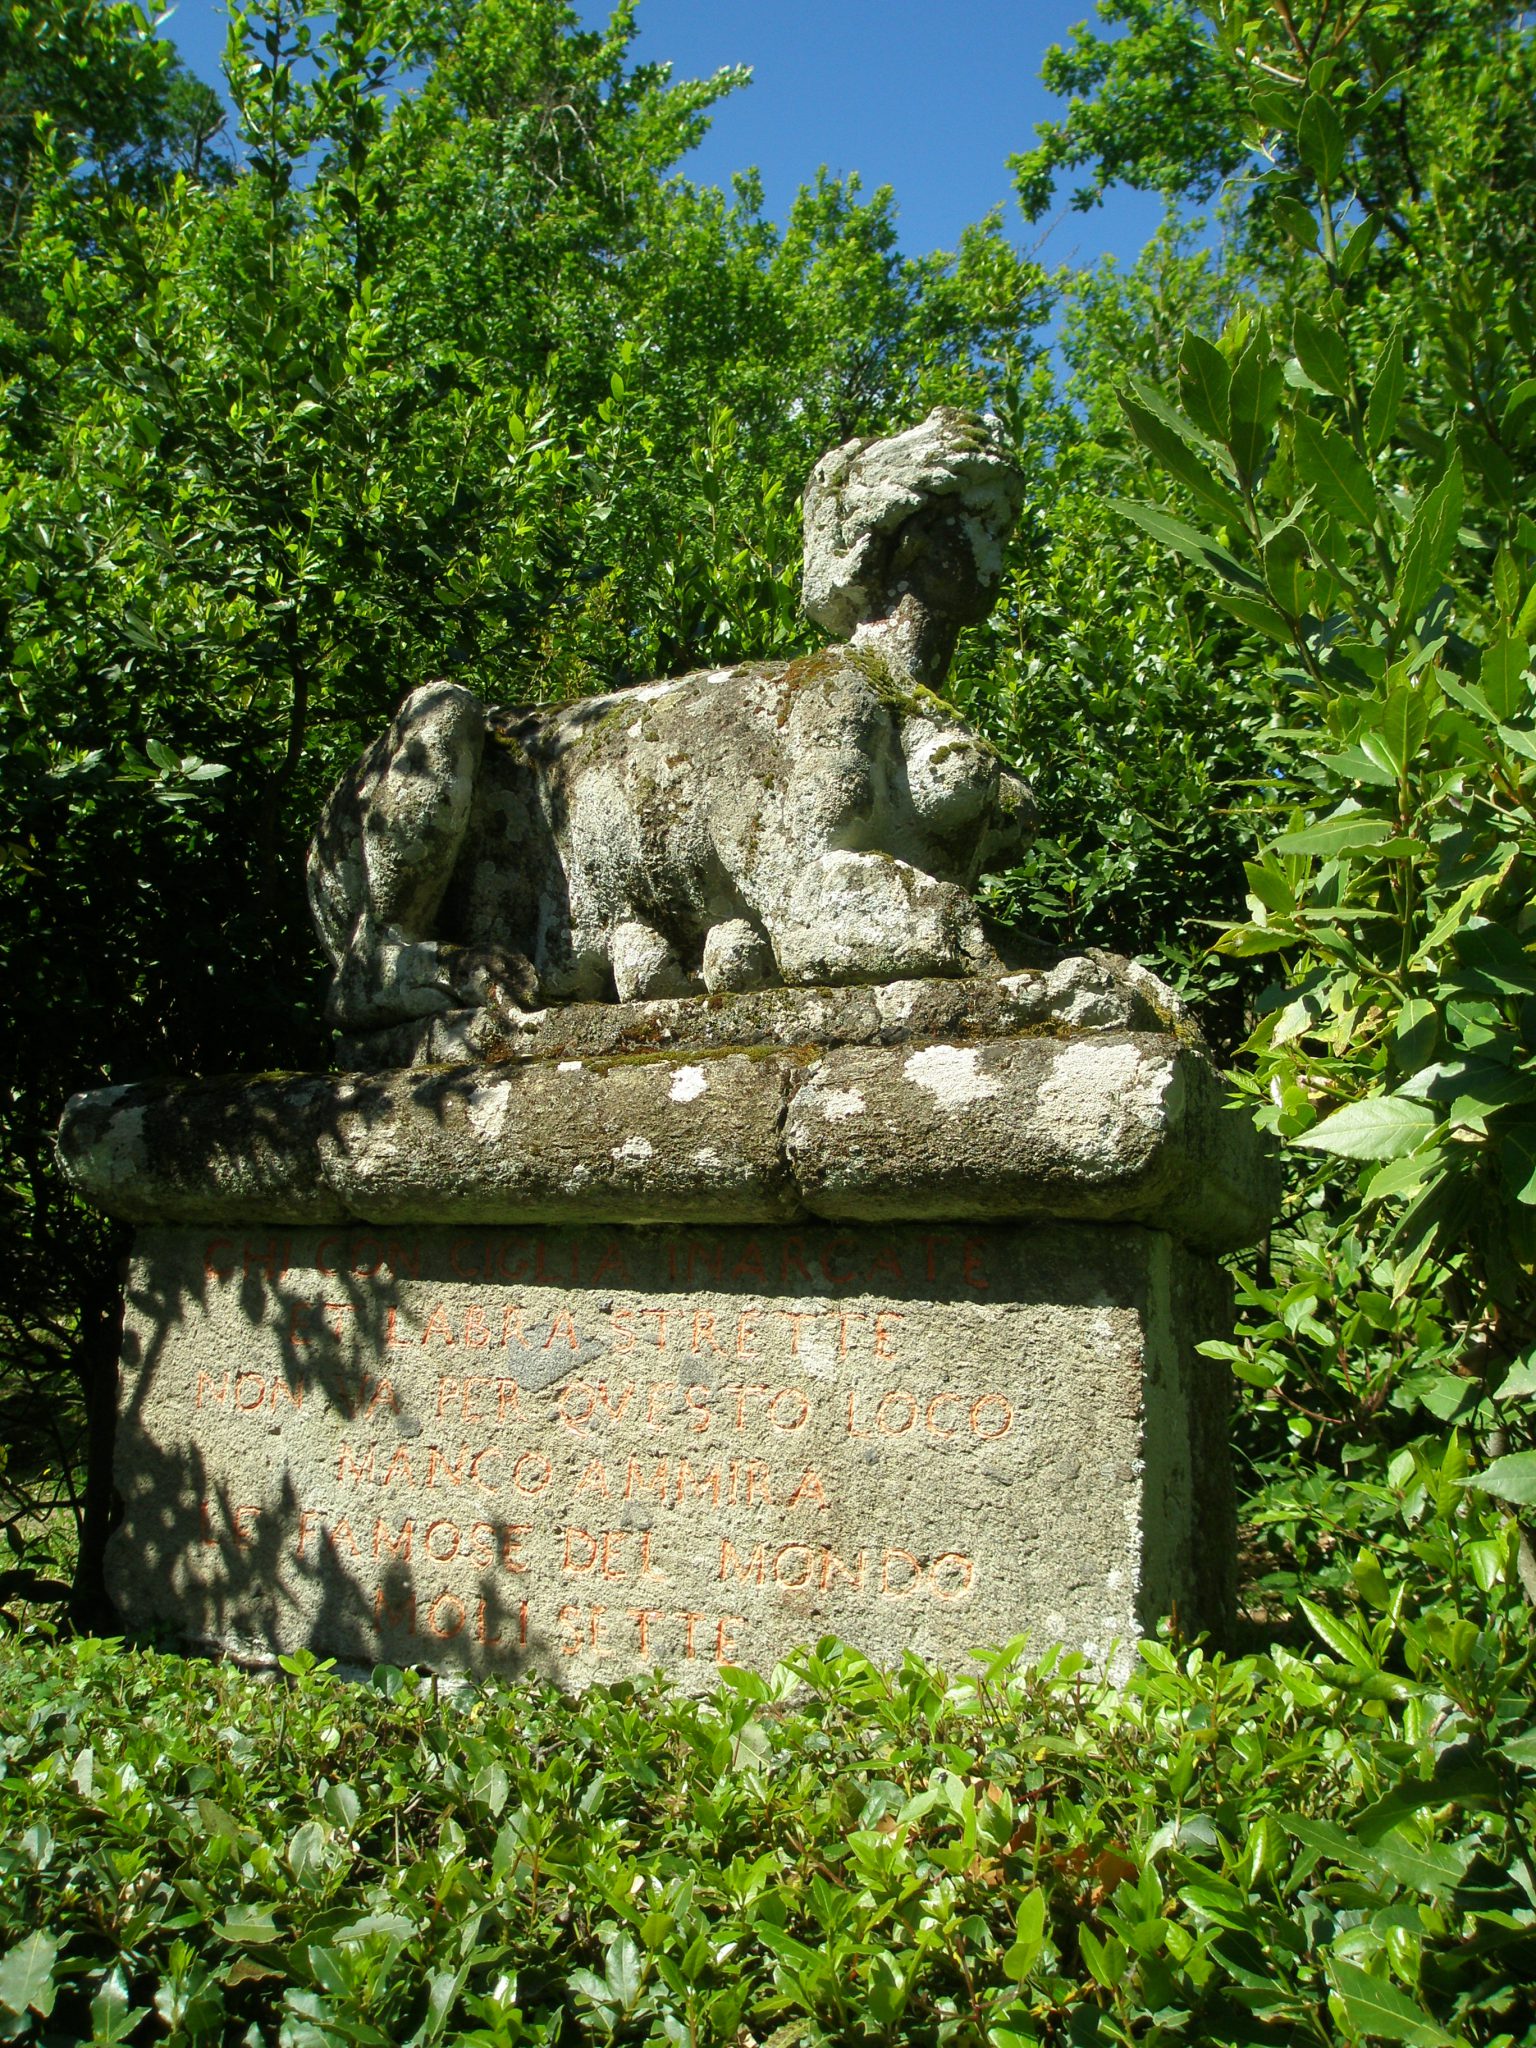 One of a pair of Sphinxes, at the entrance